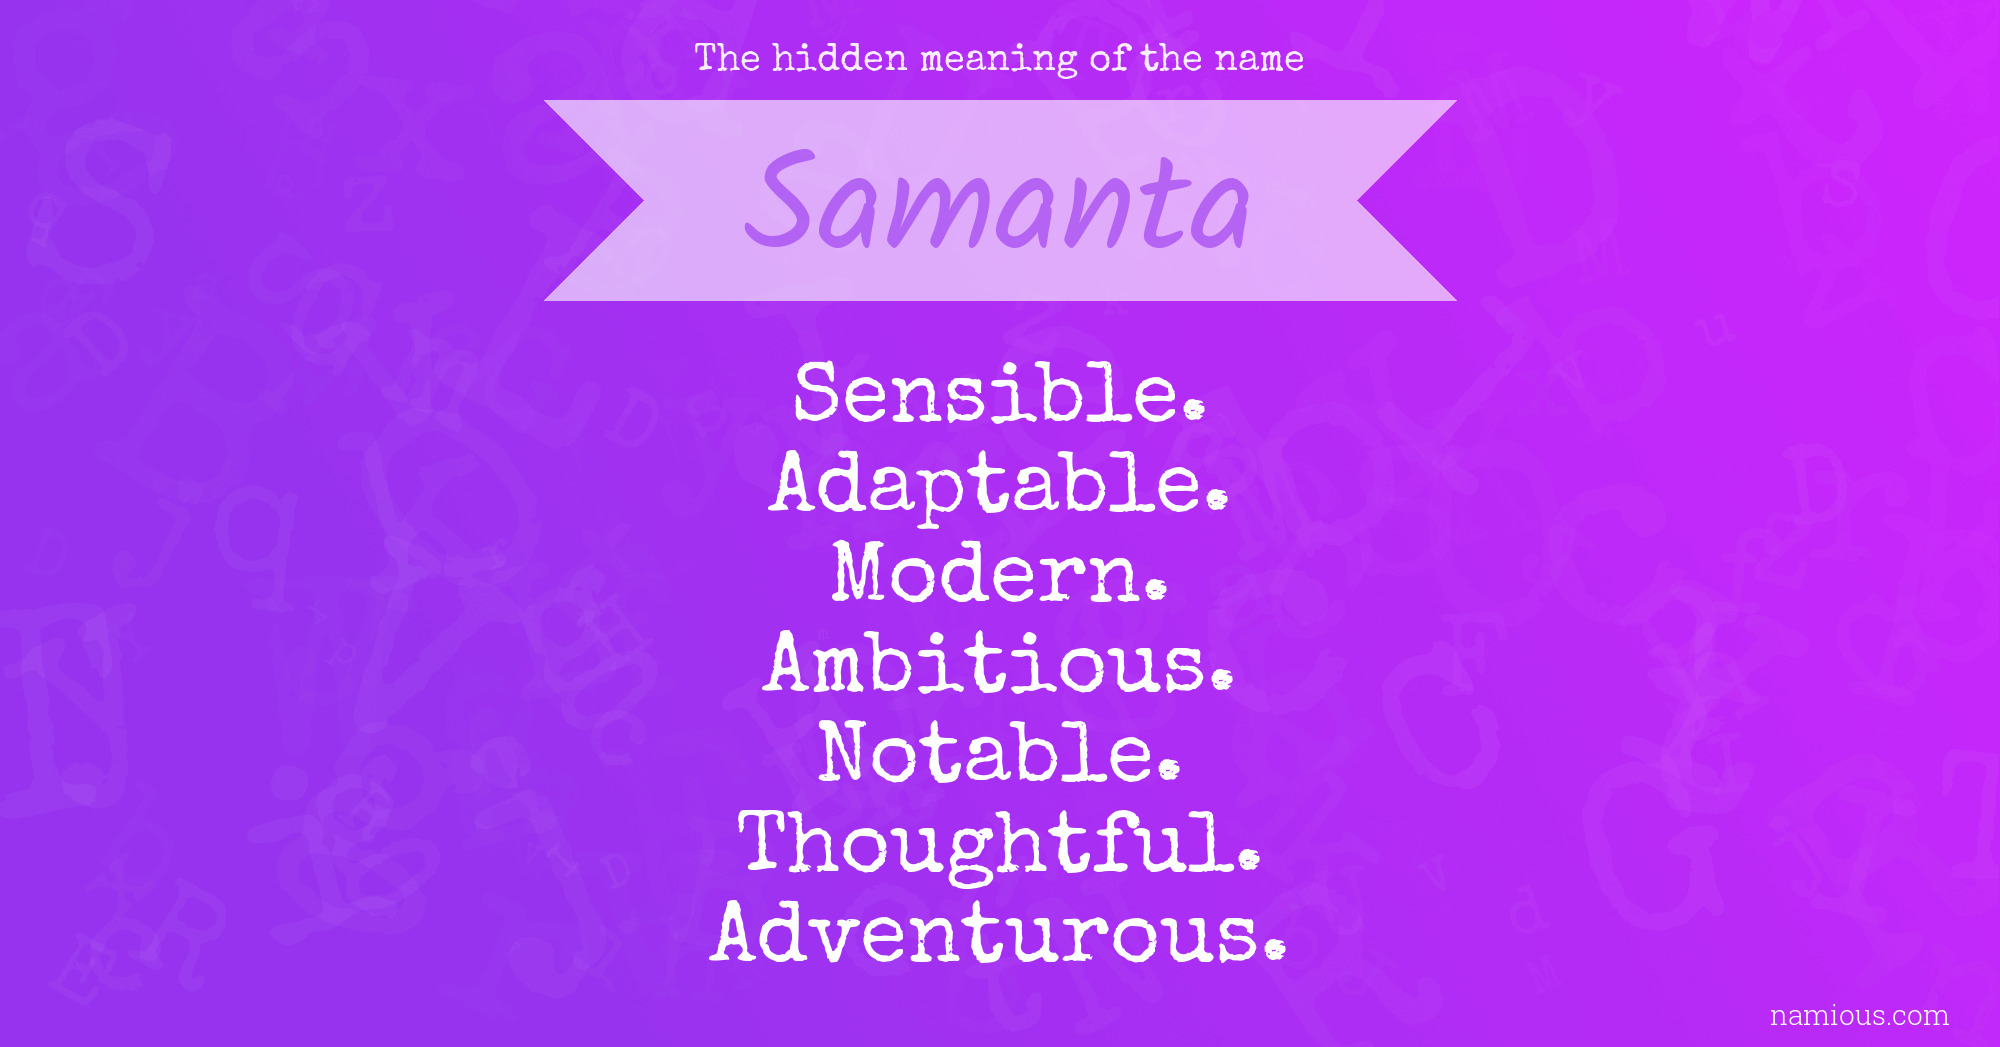 The hidden meaning of the name Samanta